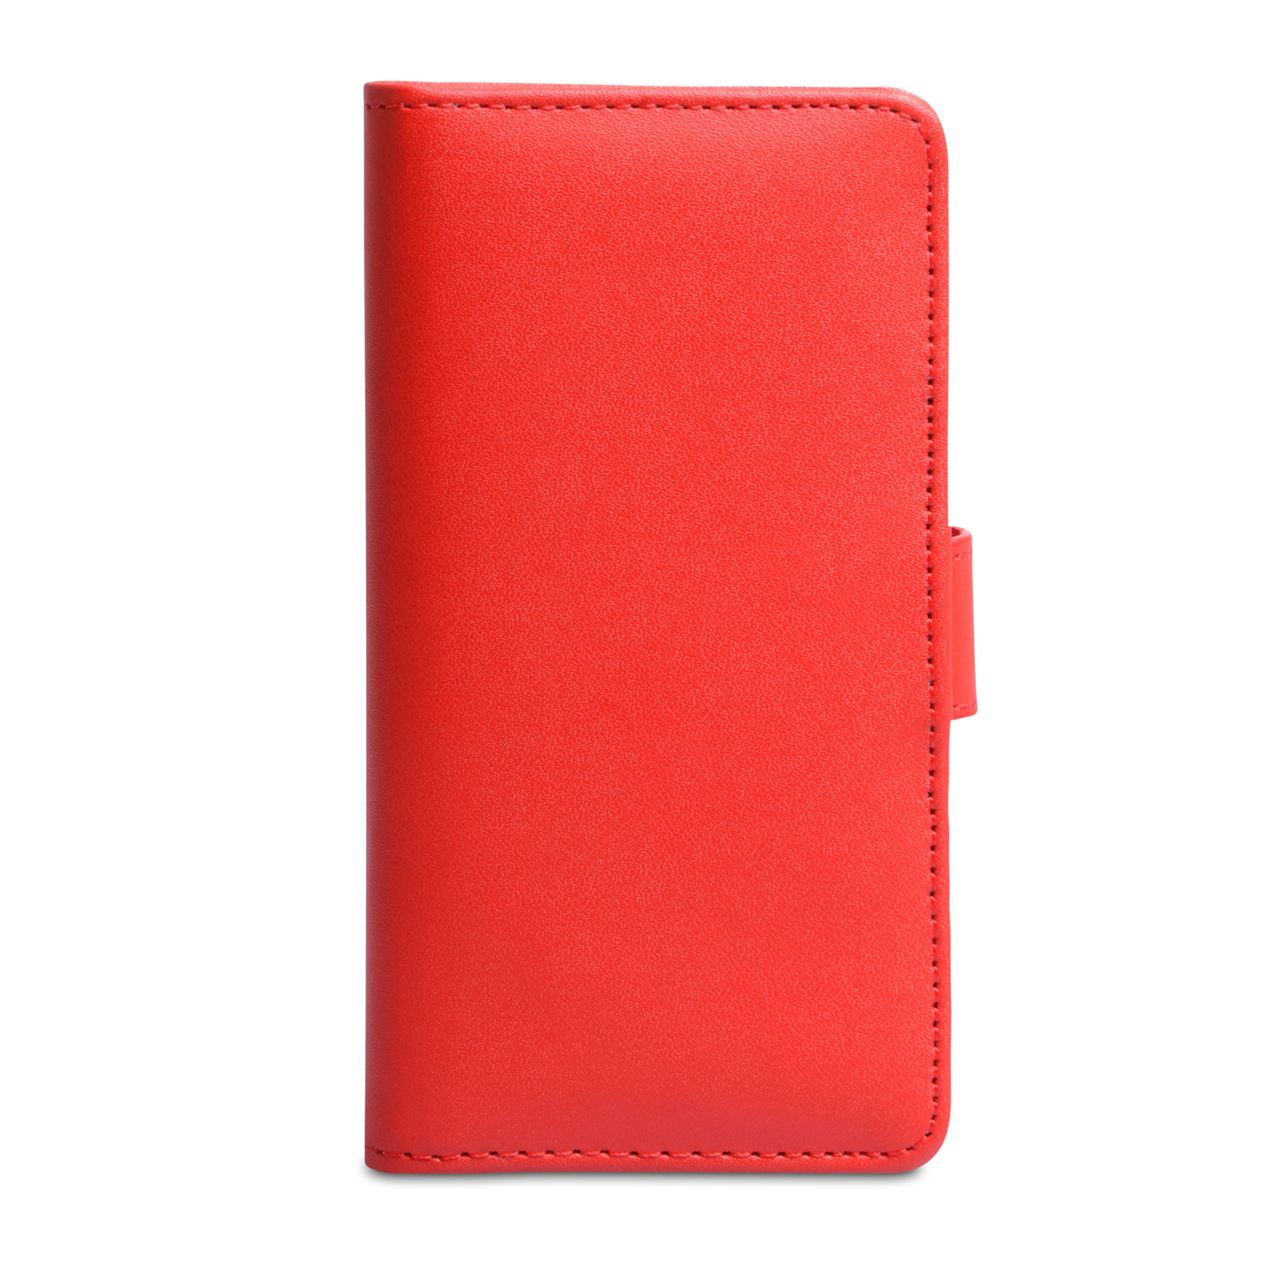 YouSave Accessories Sony Xperia SP Leather-Effect Wallet Case - Red